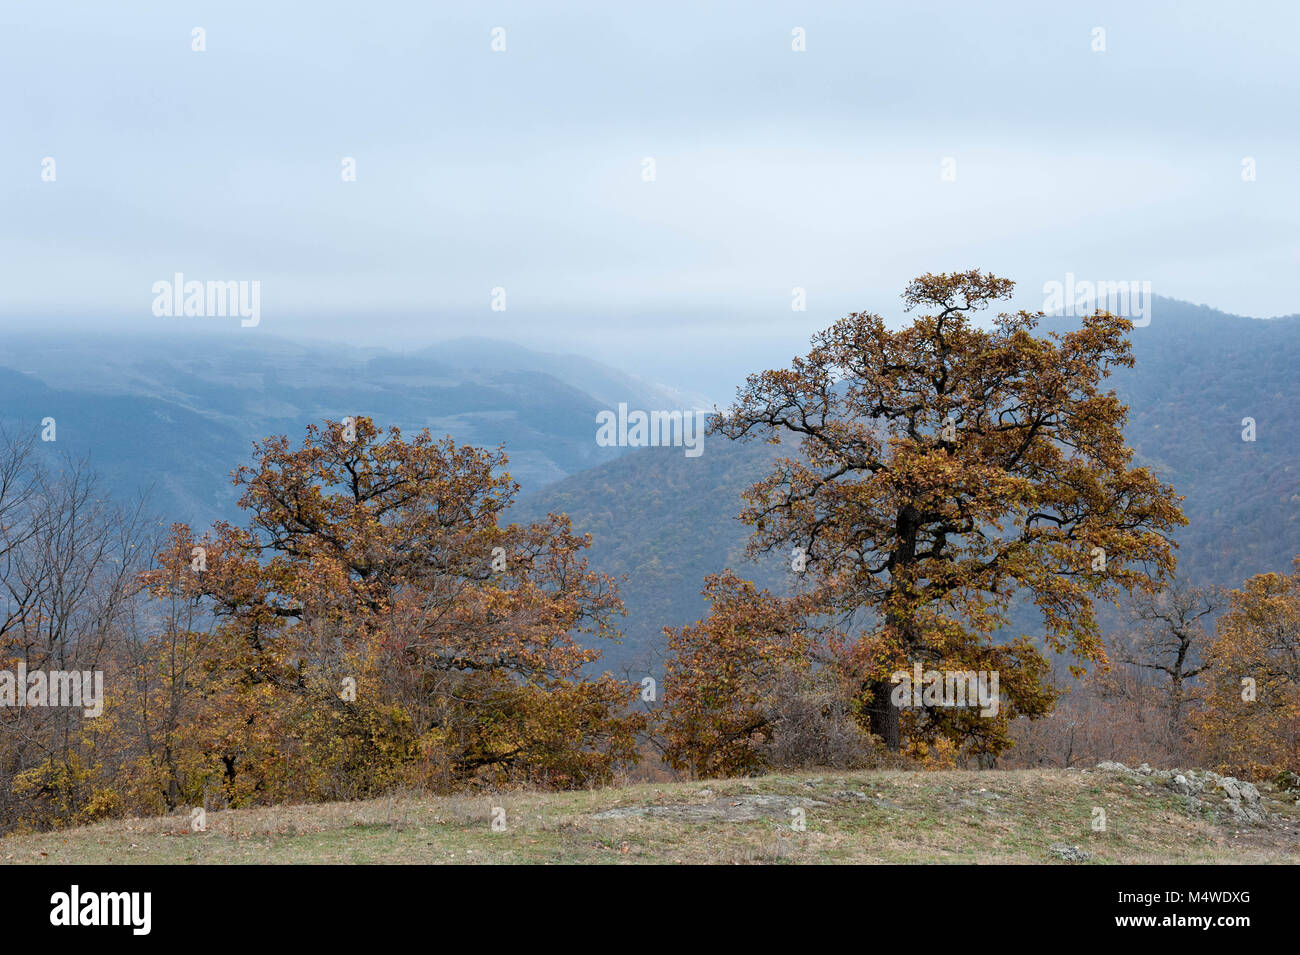 Overview of the forest near Dilijan spa town in the Tavush Province of Armenia. Stock Photo